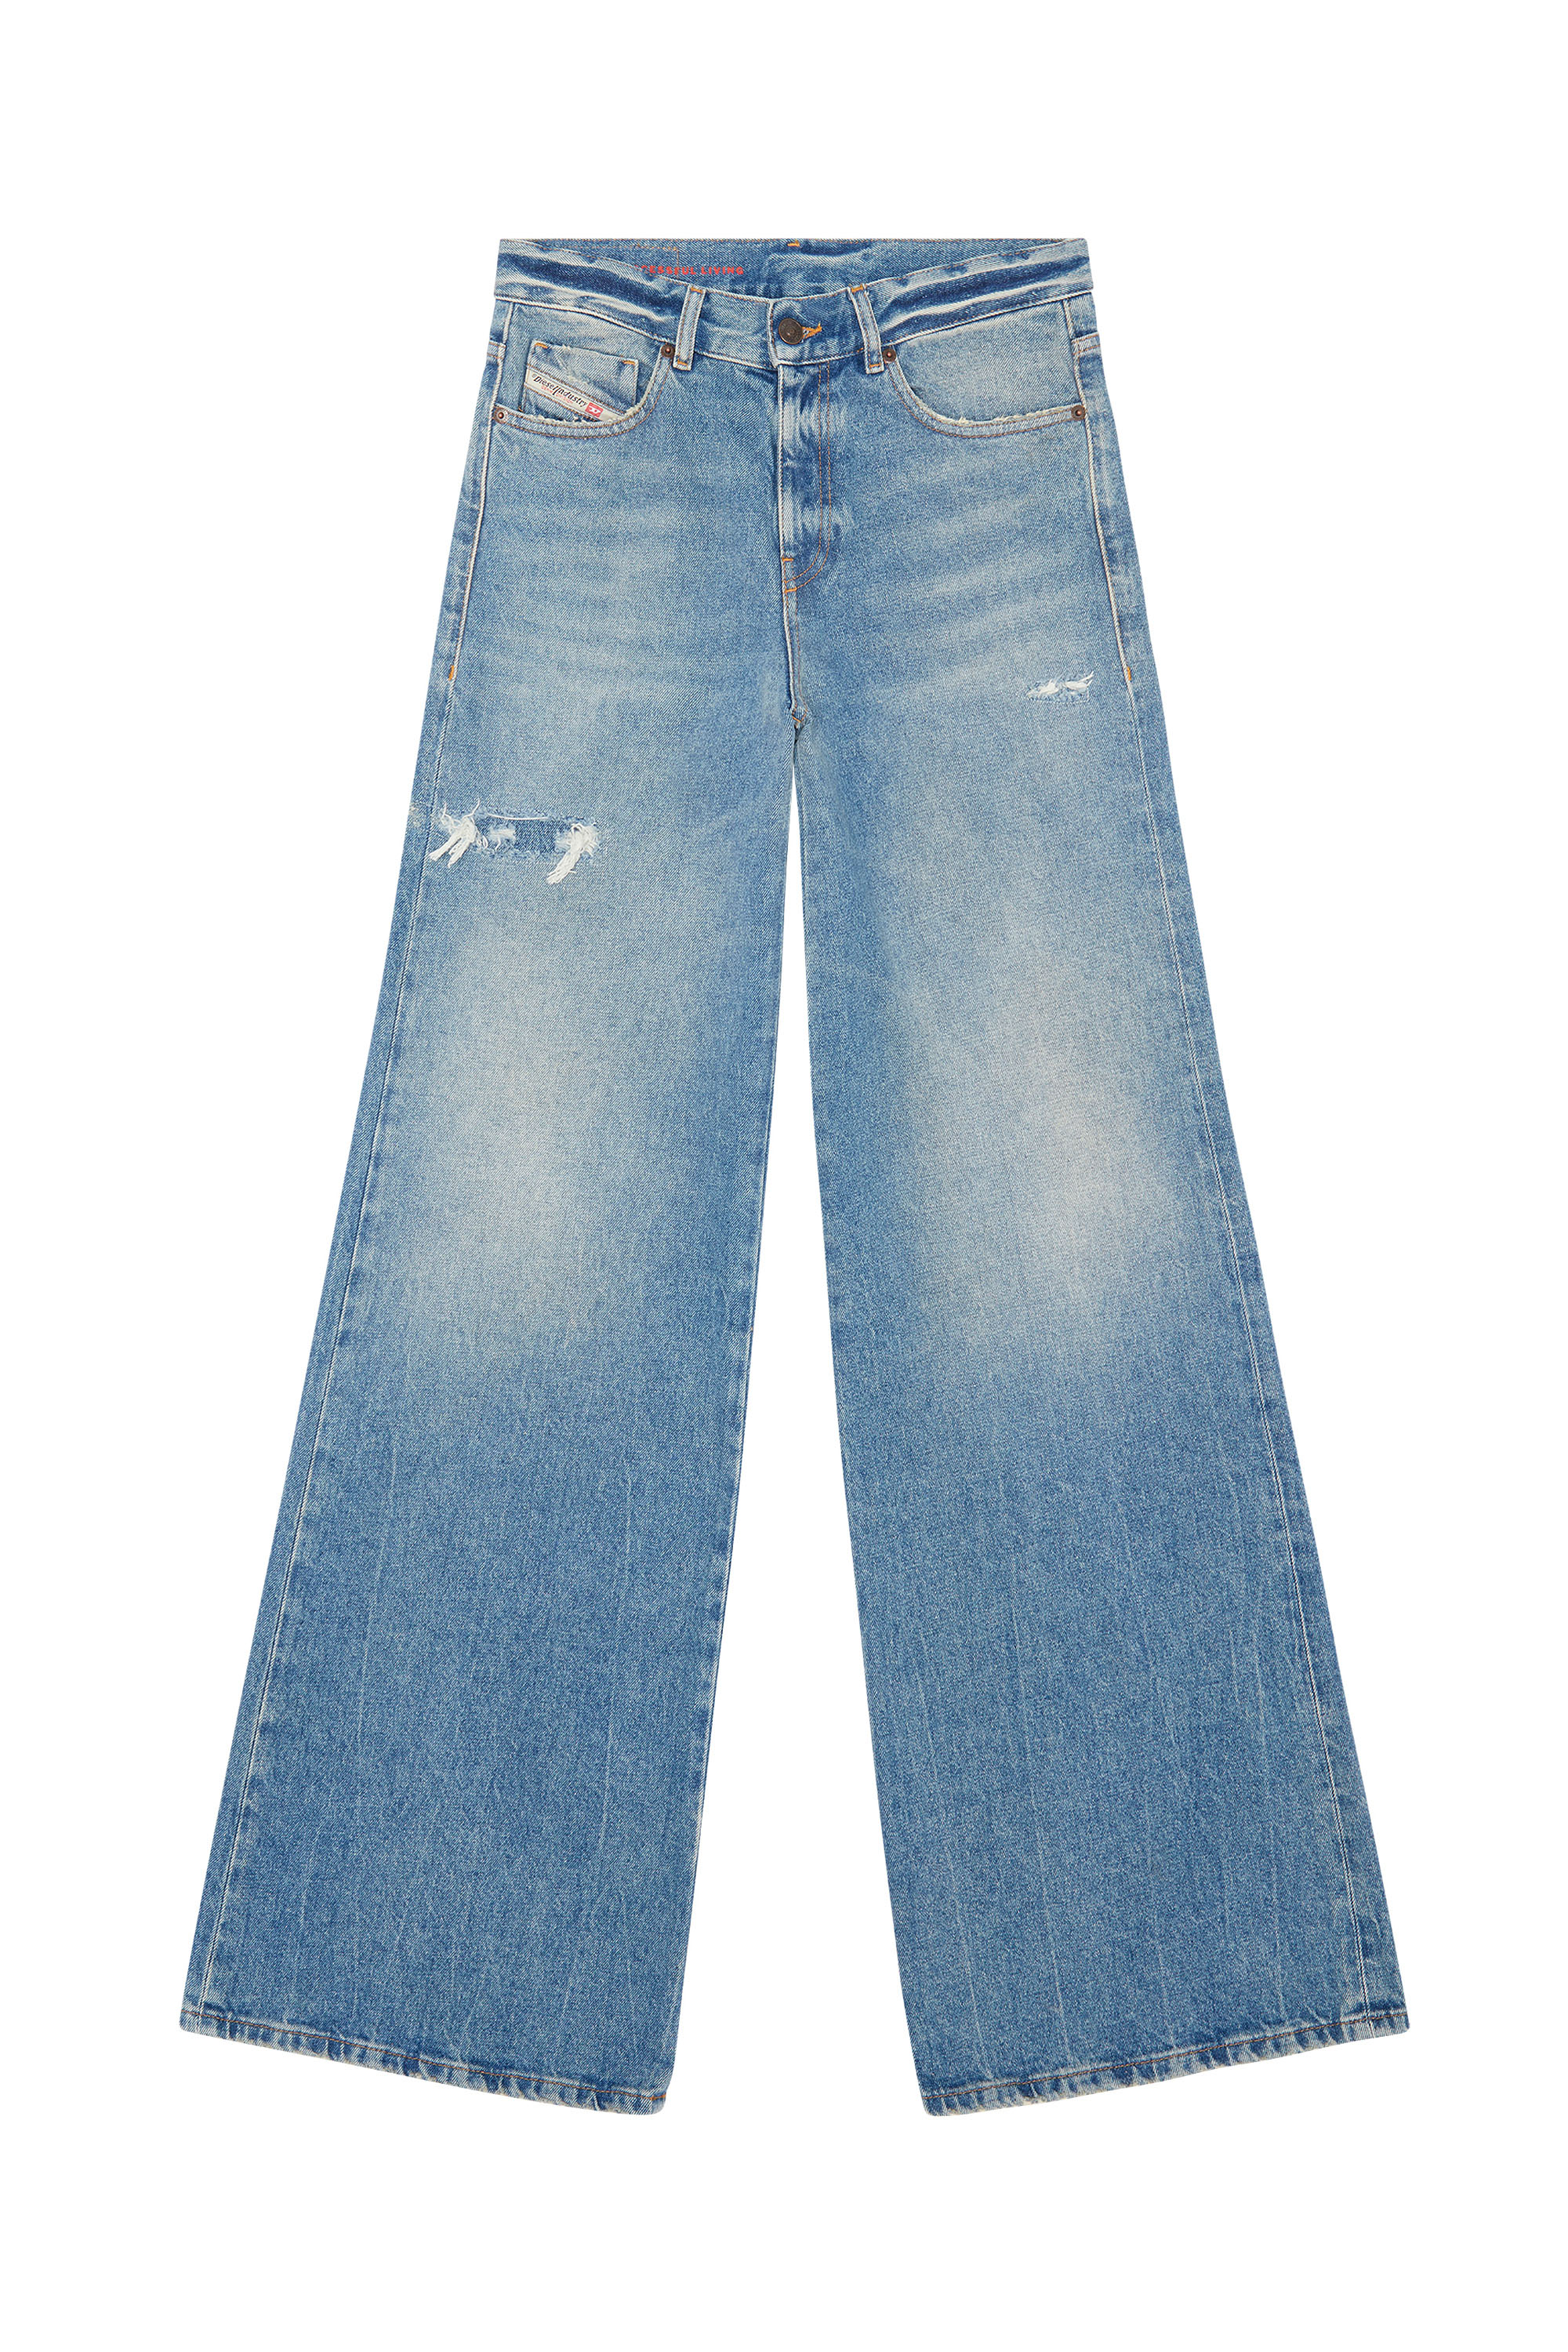 1978 09D97 Bootcut and Flare Jeans, Medium Blue - Jeans